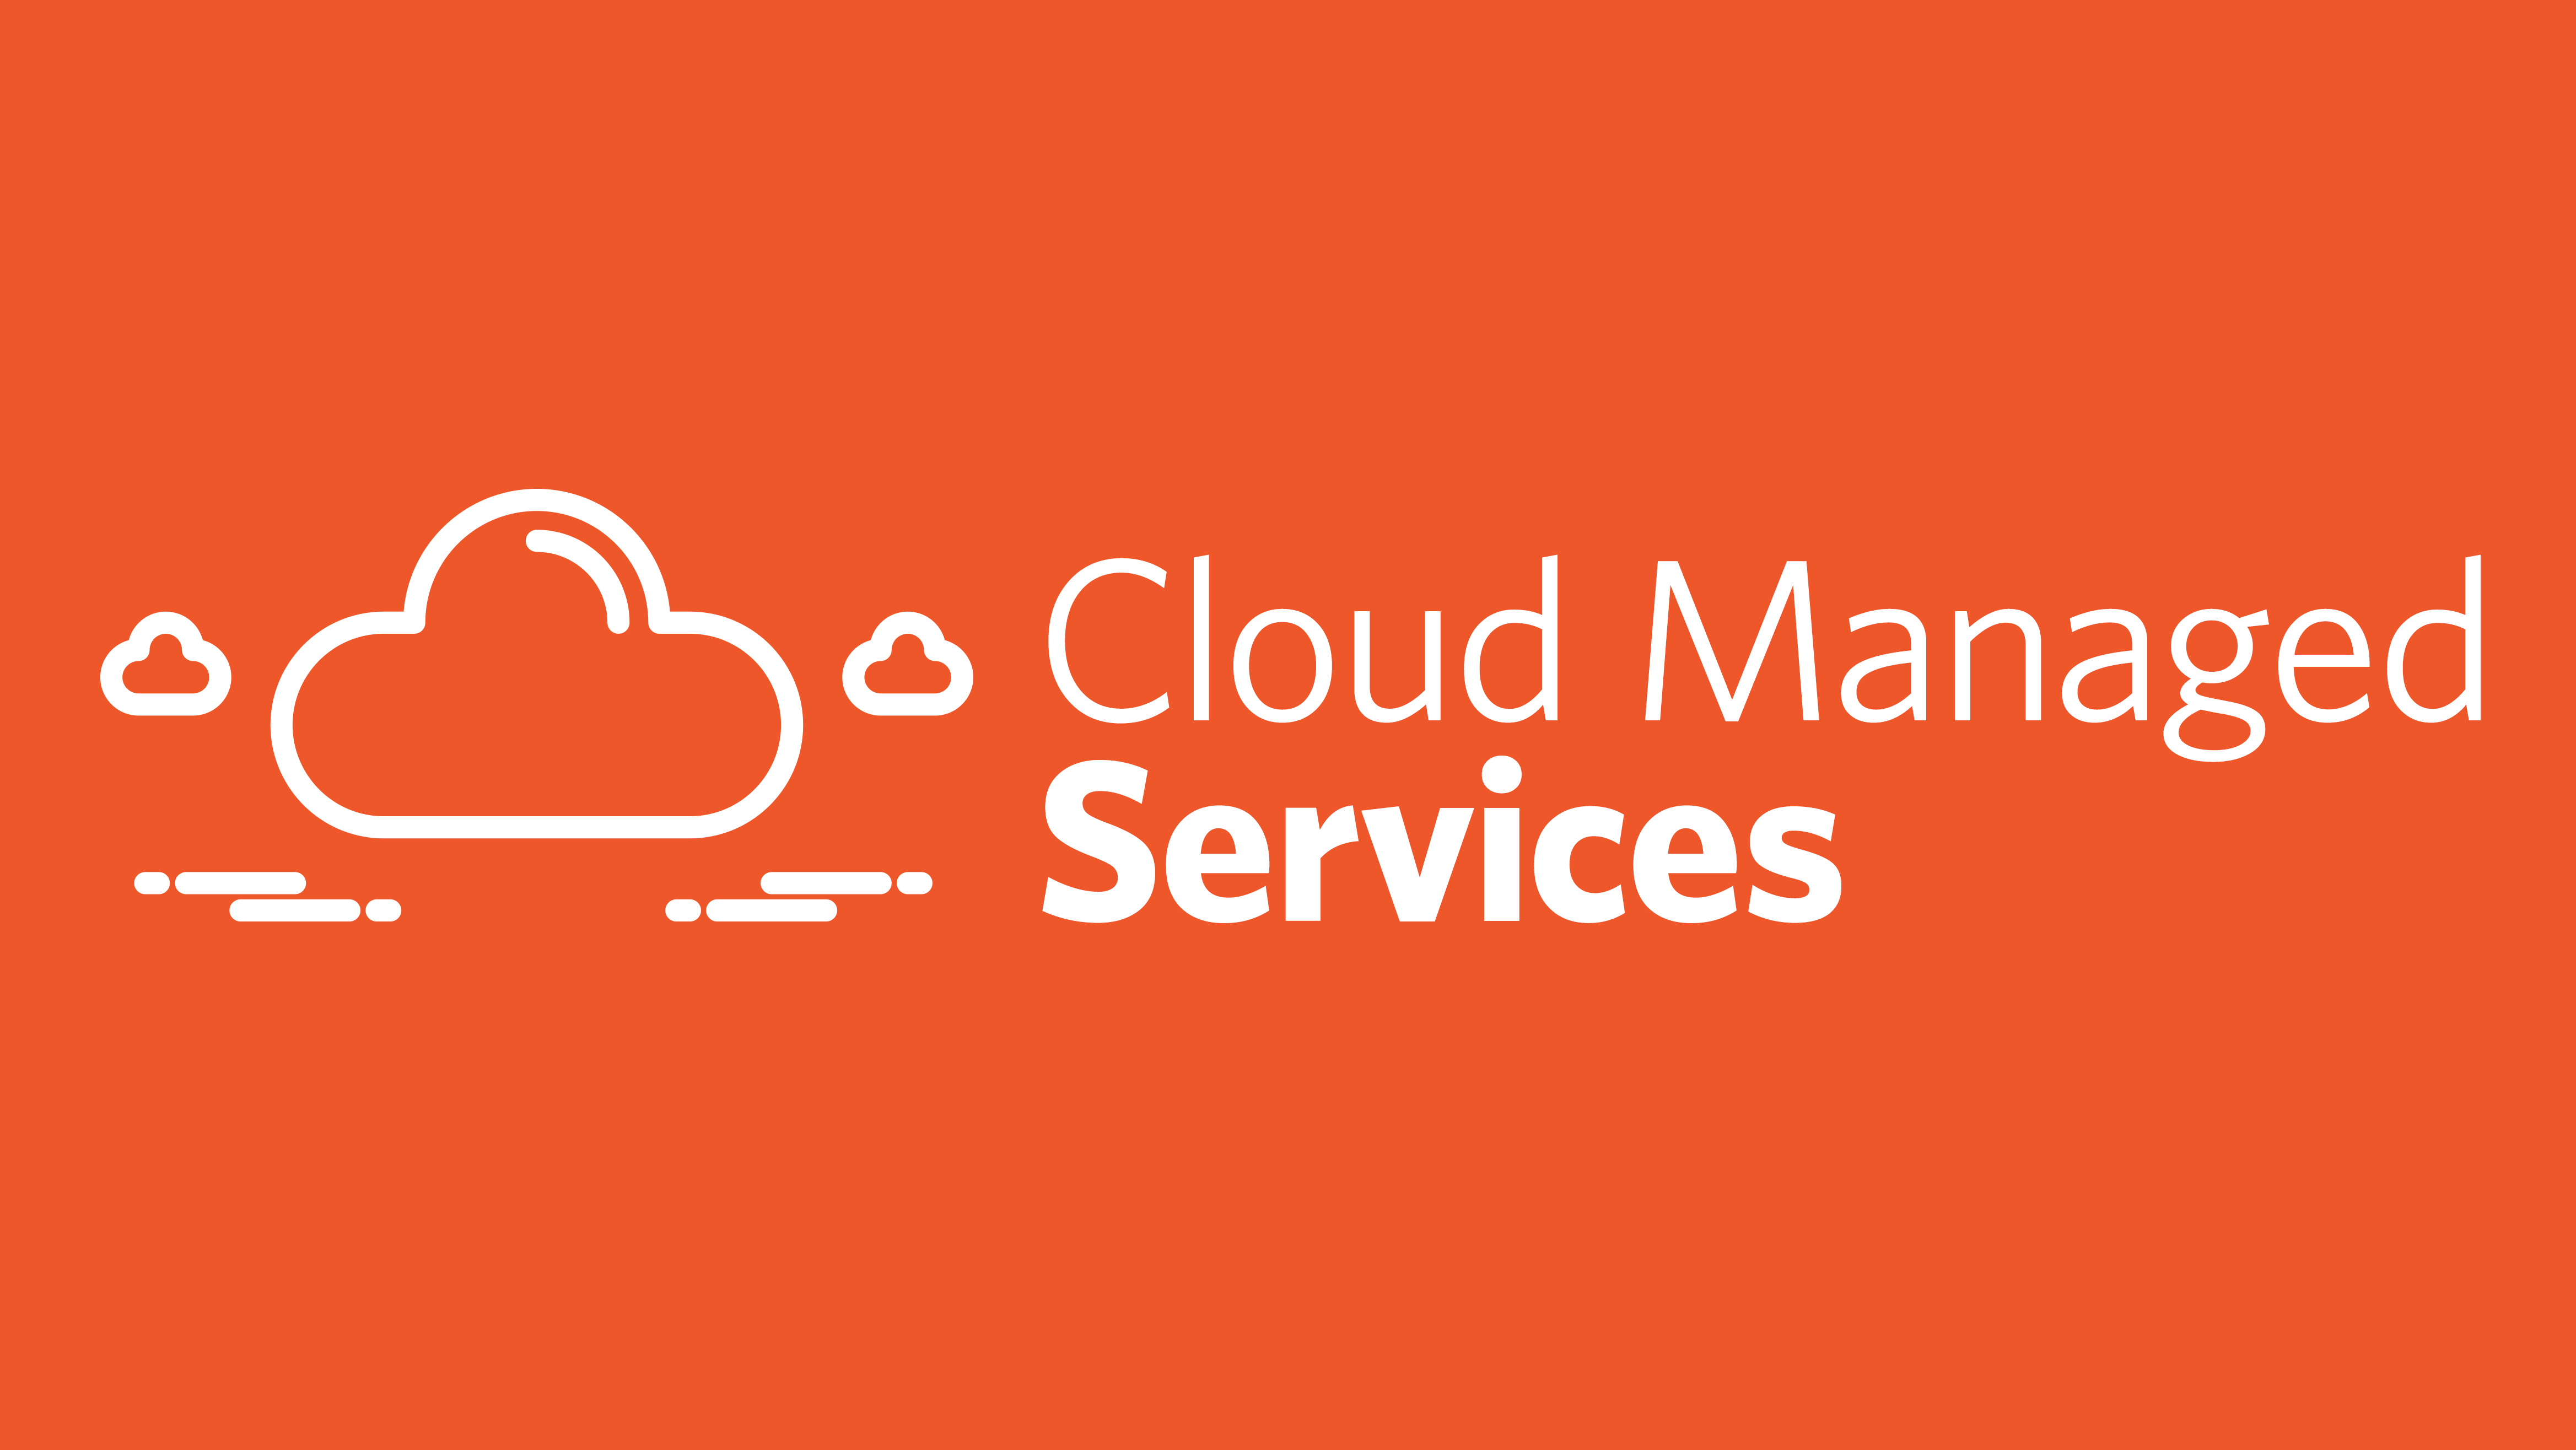 2020 Blog Series: Cloud Managed Services